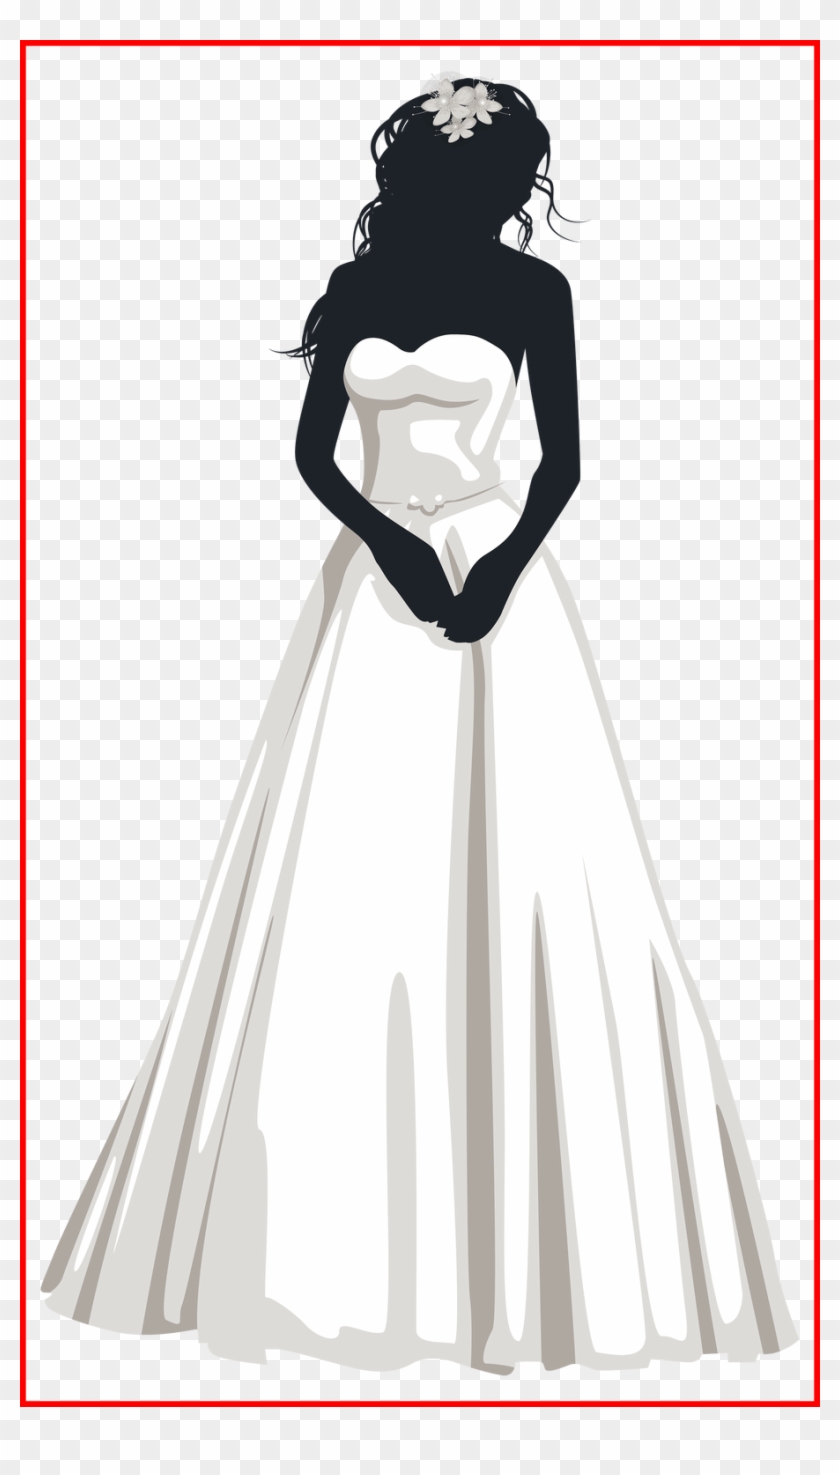 Astonishing Bride Silhouette - Bride Drawing Png Clipart